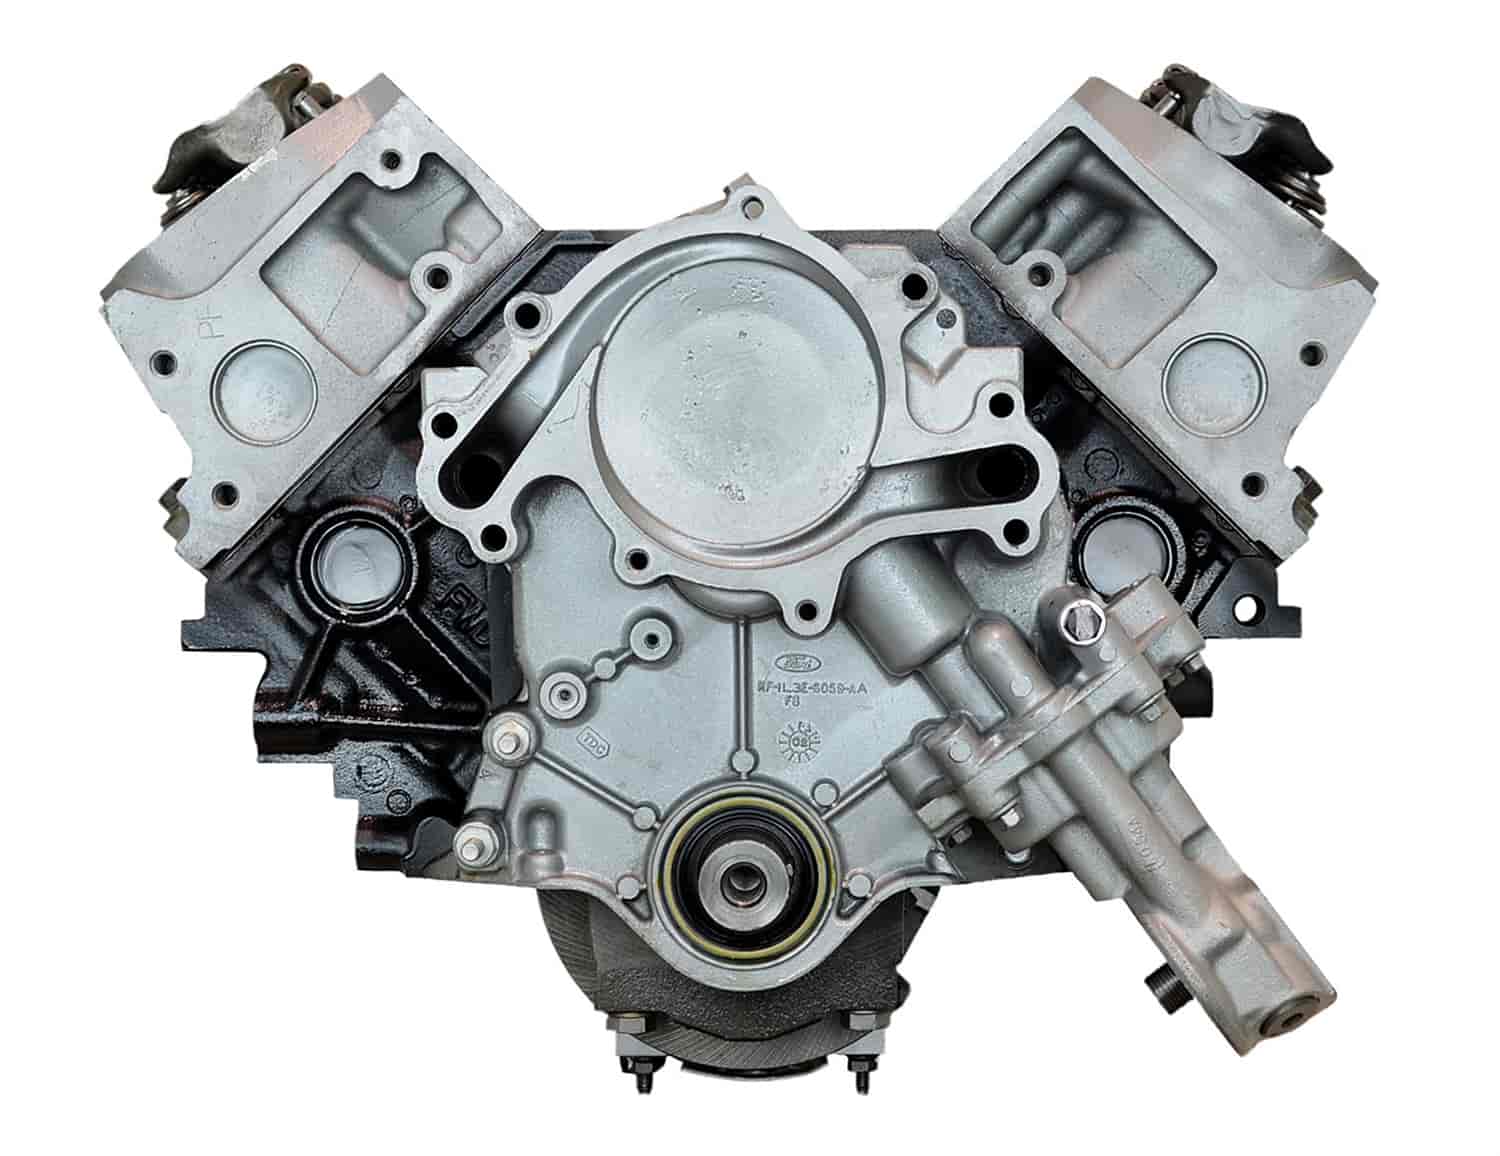 Remanufactured Crate Engine for 2001-2003 Ford Aerostar with